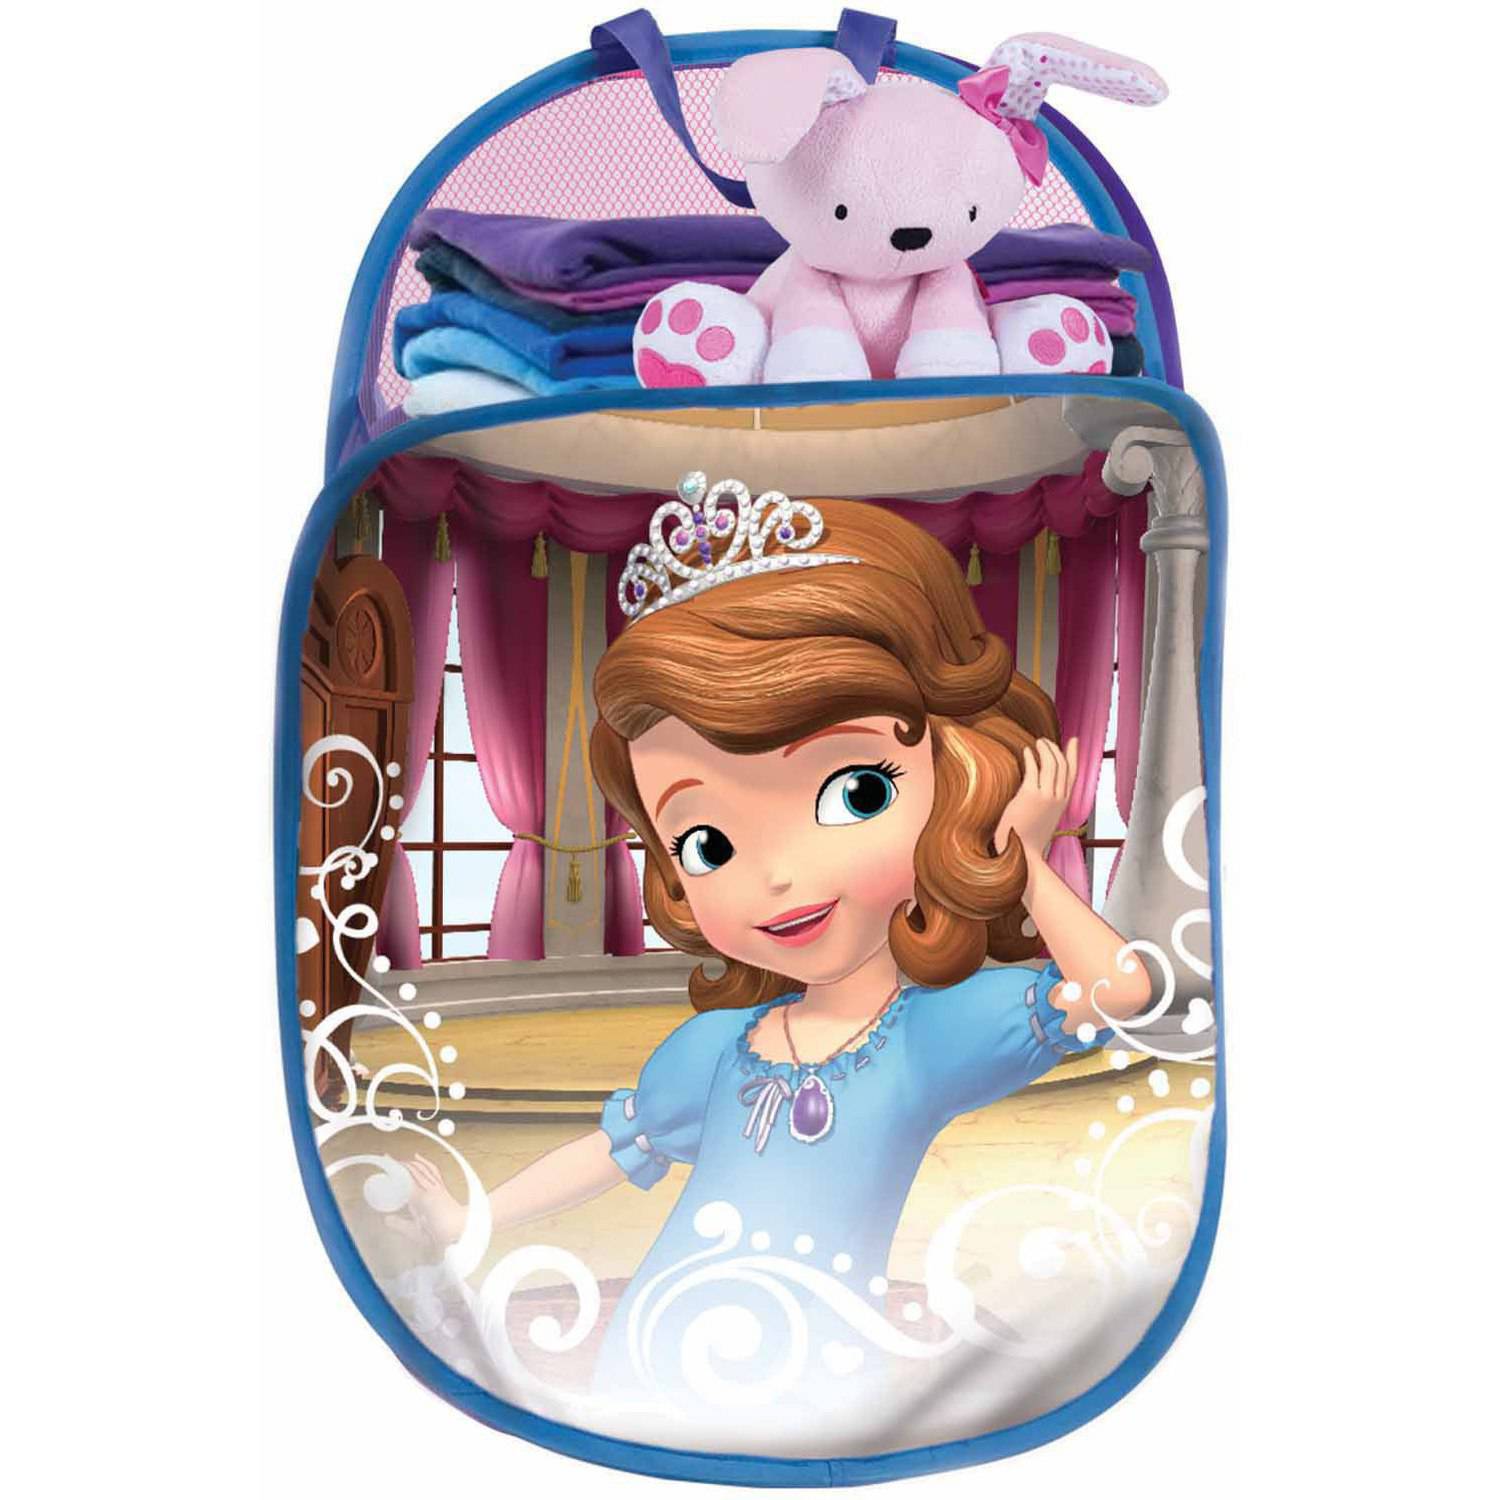 Playhut Disney Sofia the First Pop N Play Tote - image 1 of 2